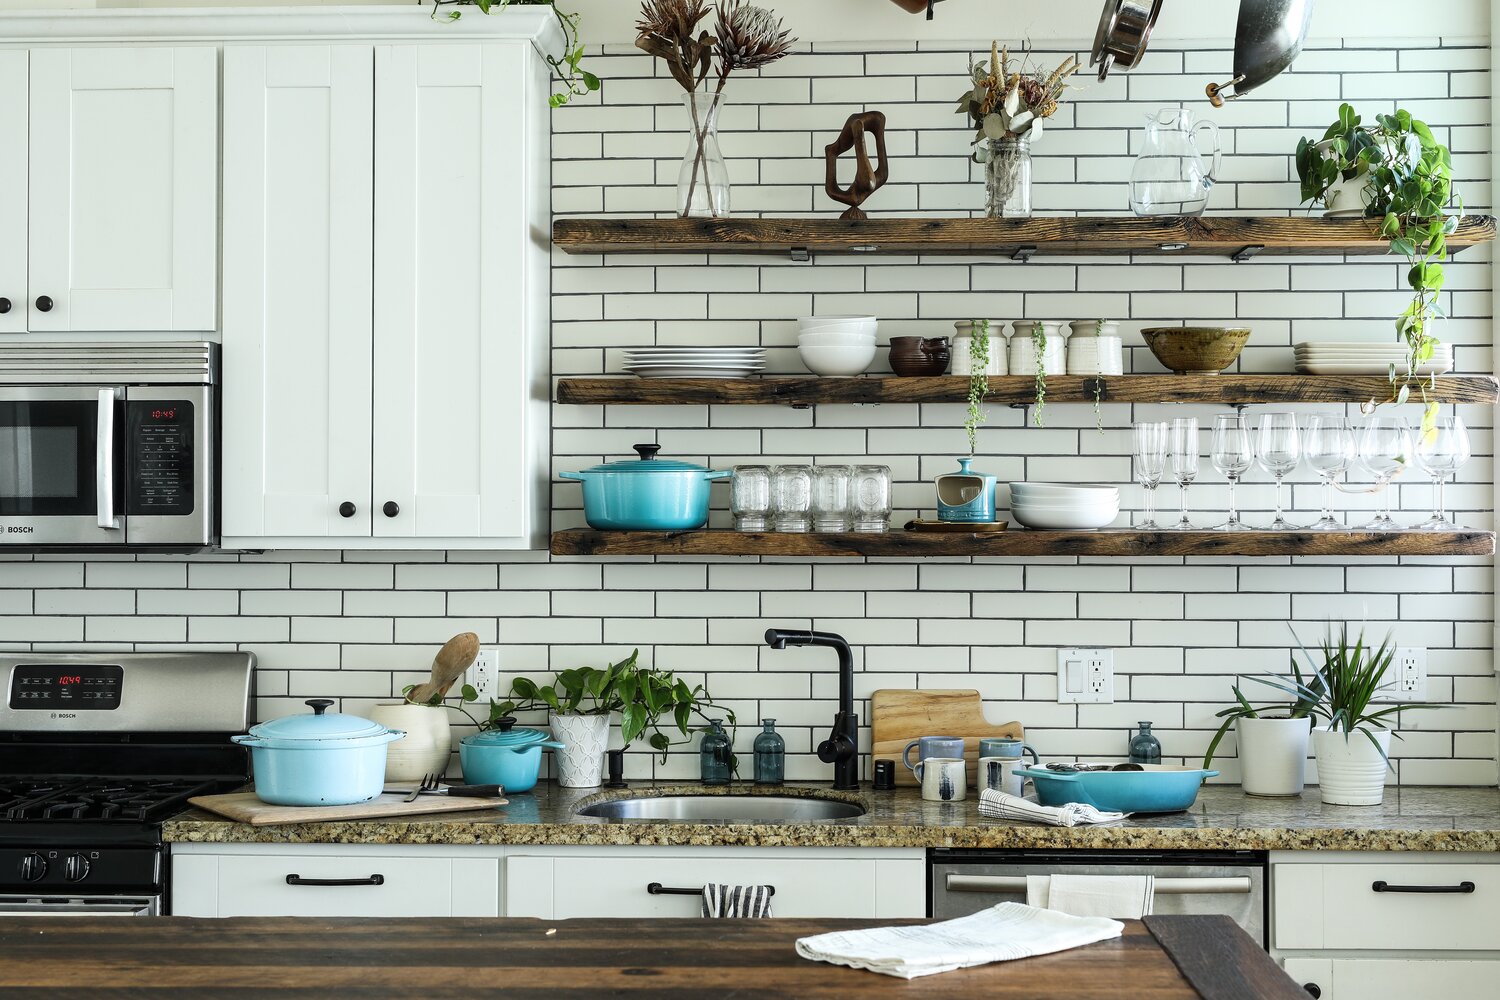 UNPACKING AFTER MOVING HOUSE: 5 EASY TIPS FOR ORGANISING YOUR KITCHEN